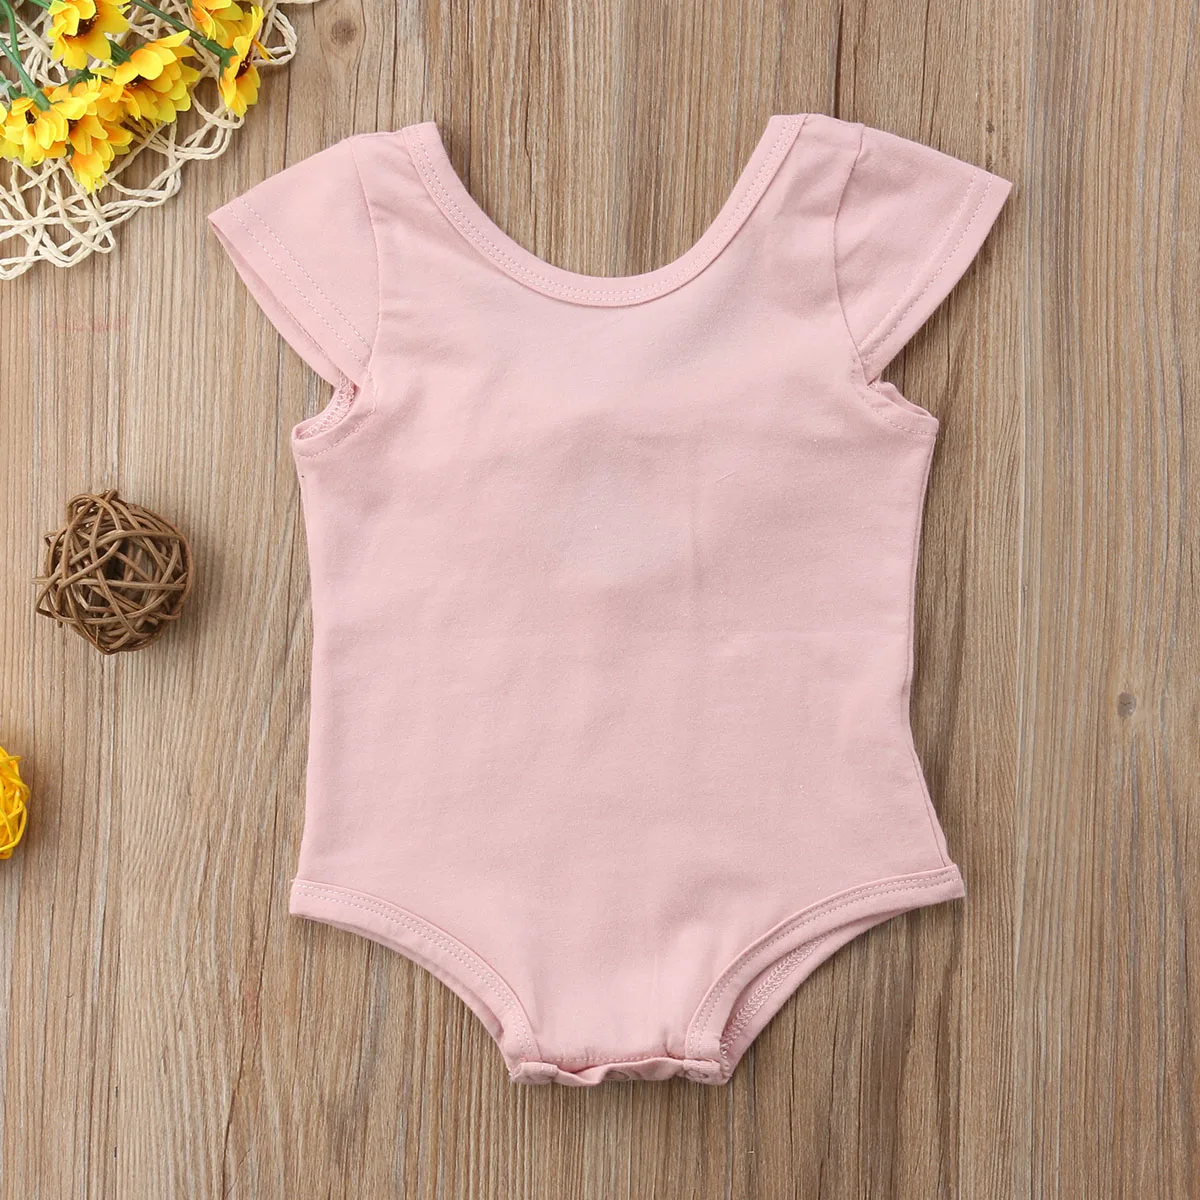 Brand New Summer Casual Toddler Baby Girl Romper Short Sleeve Solid Back Bow Jumpsuits Romper Btief Outfit Wholesale 0-24Ms - Color: Pink